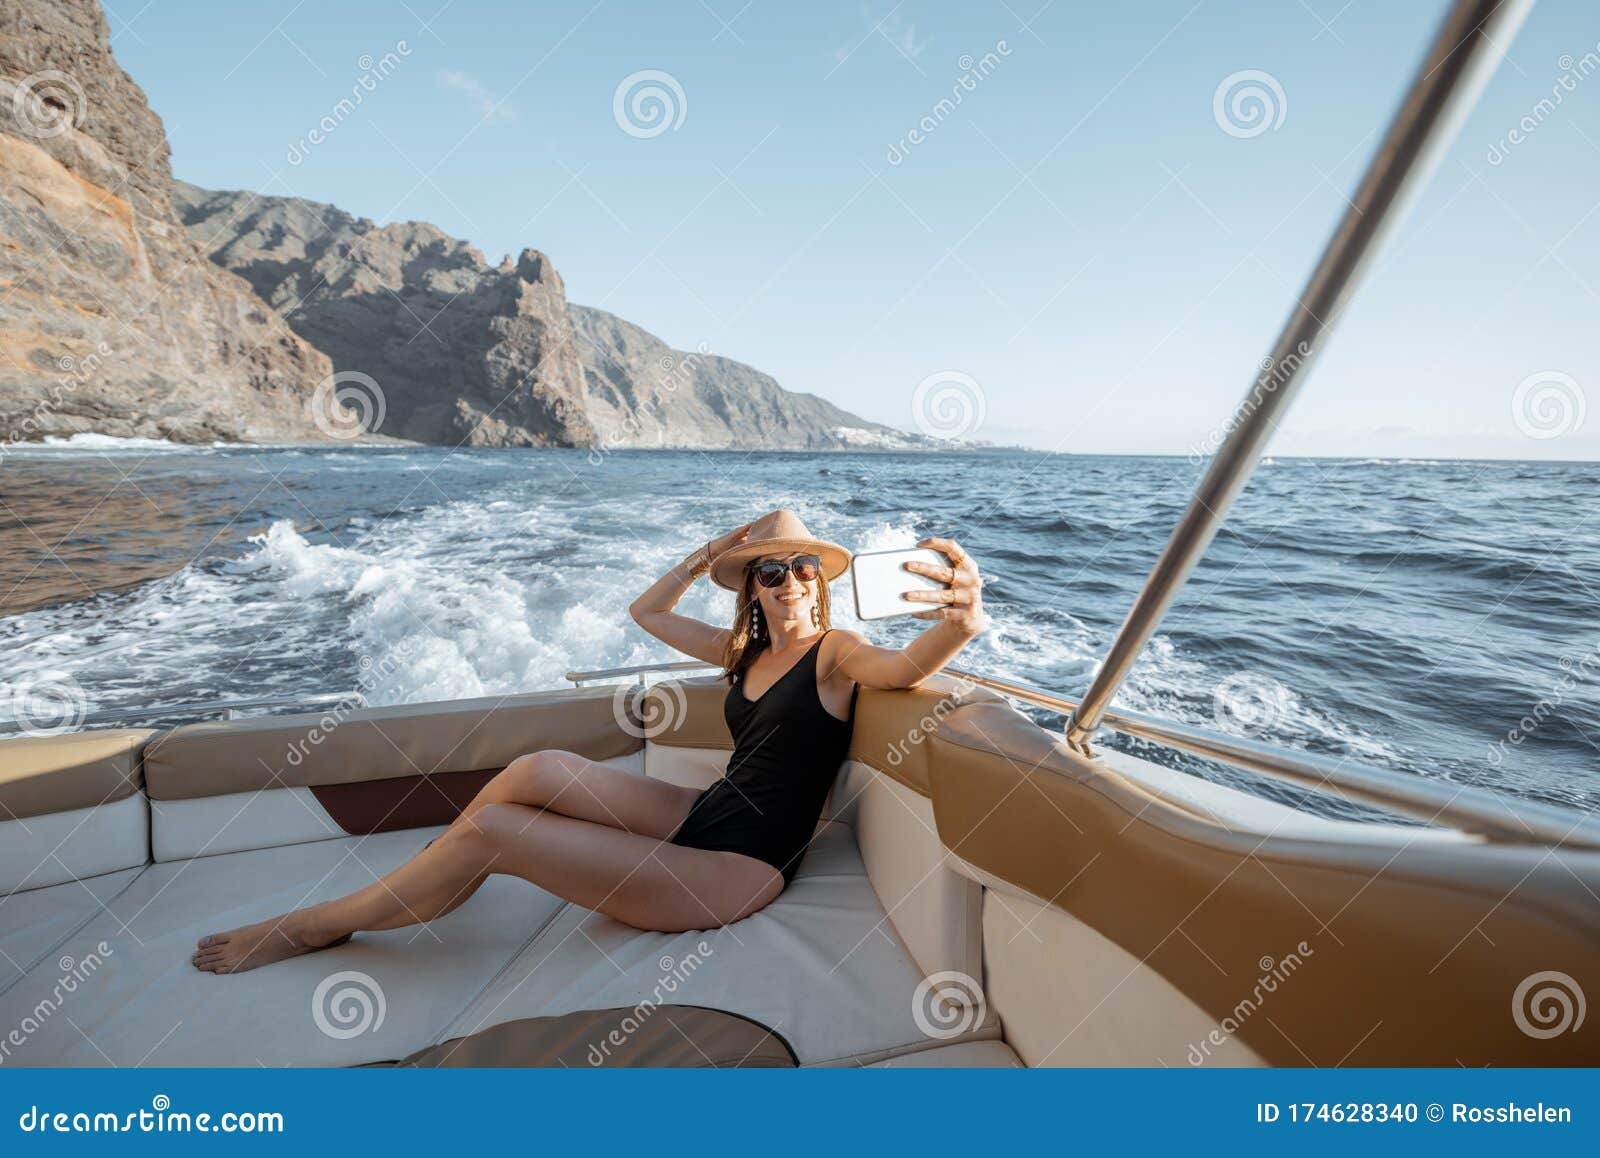 woman on yacht pictures